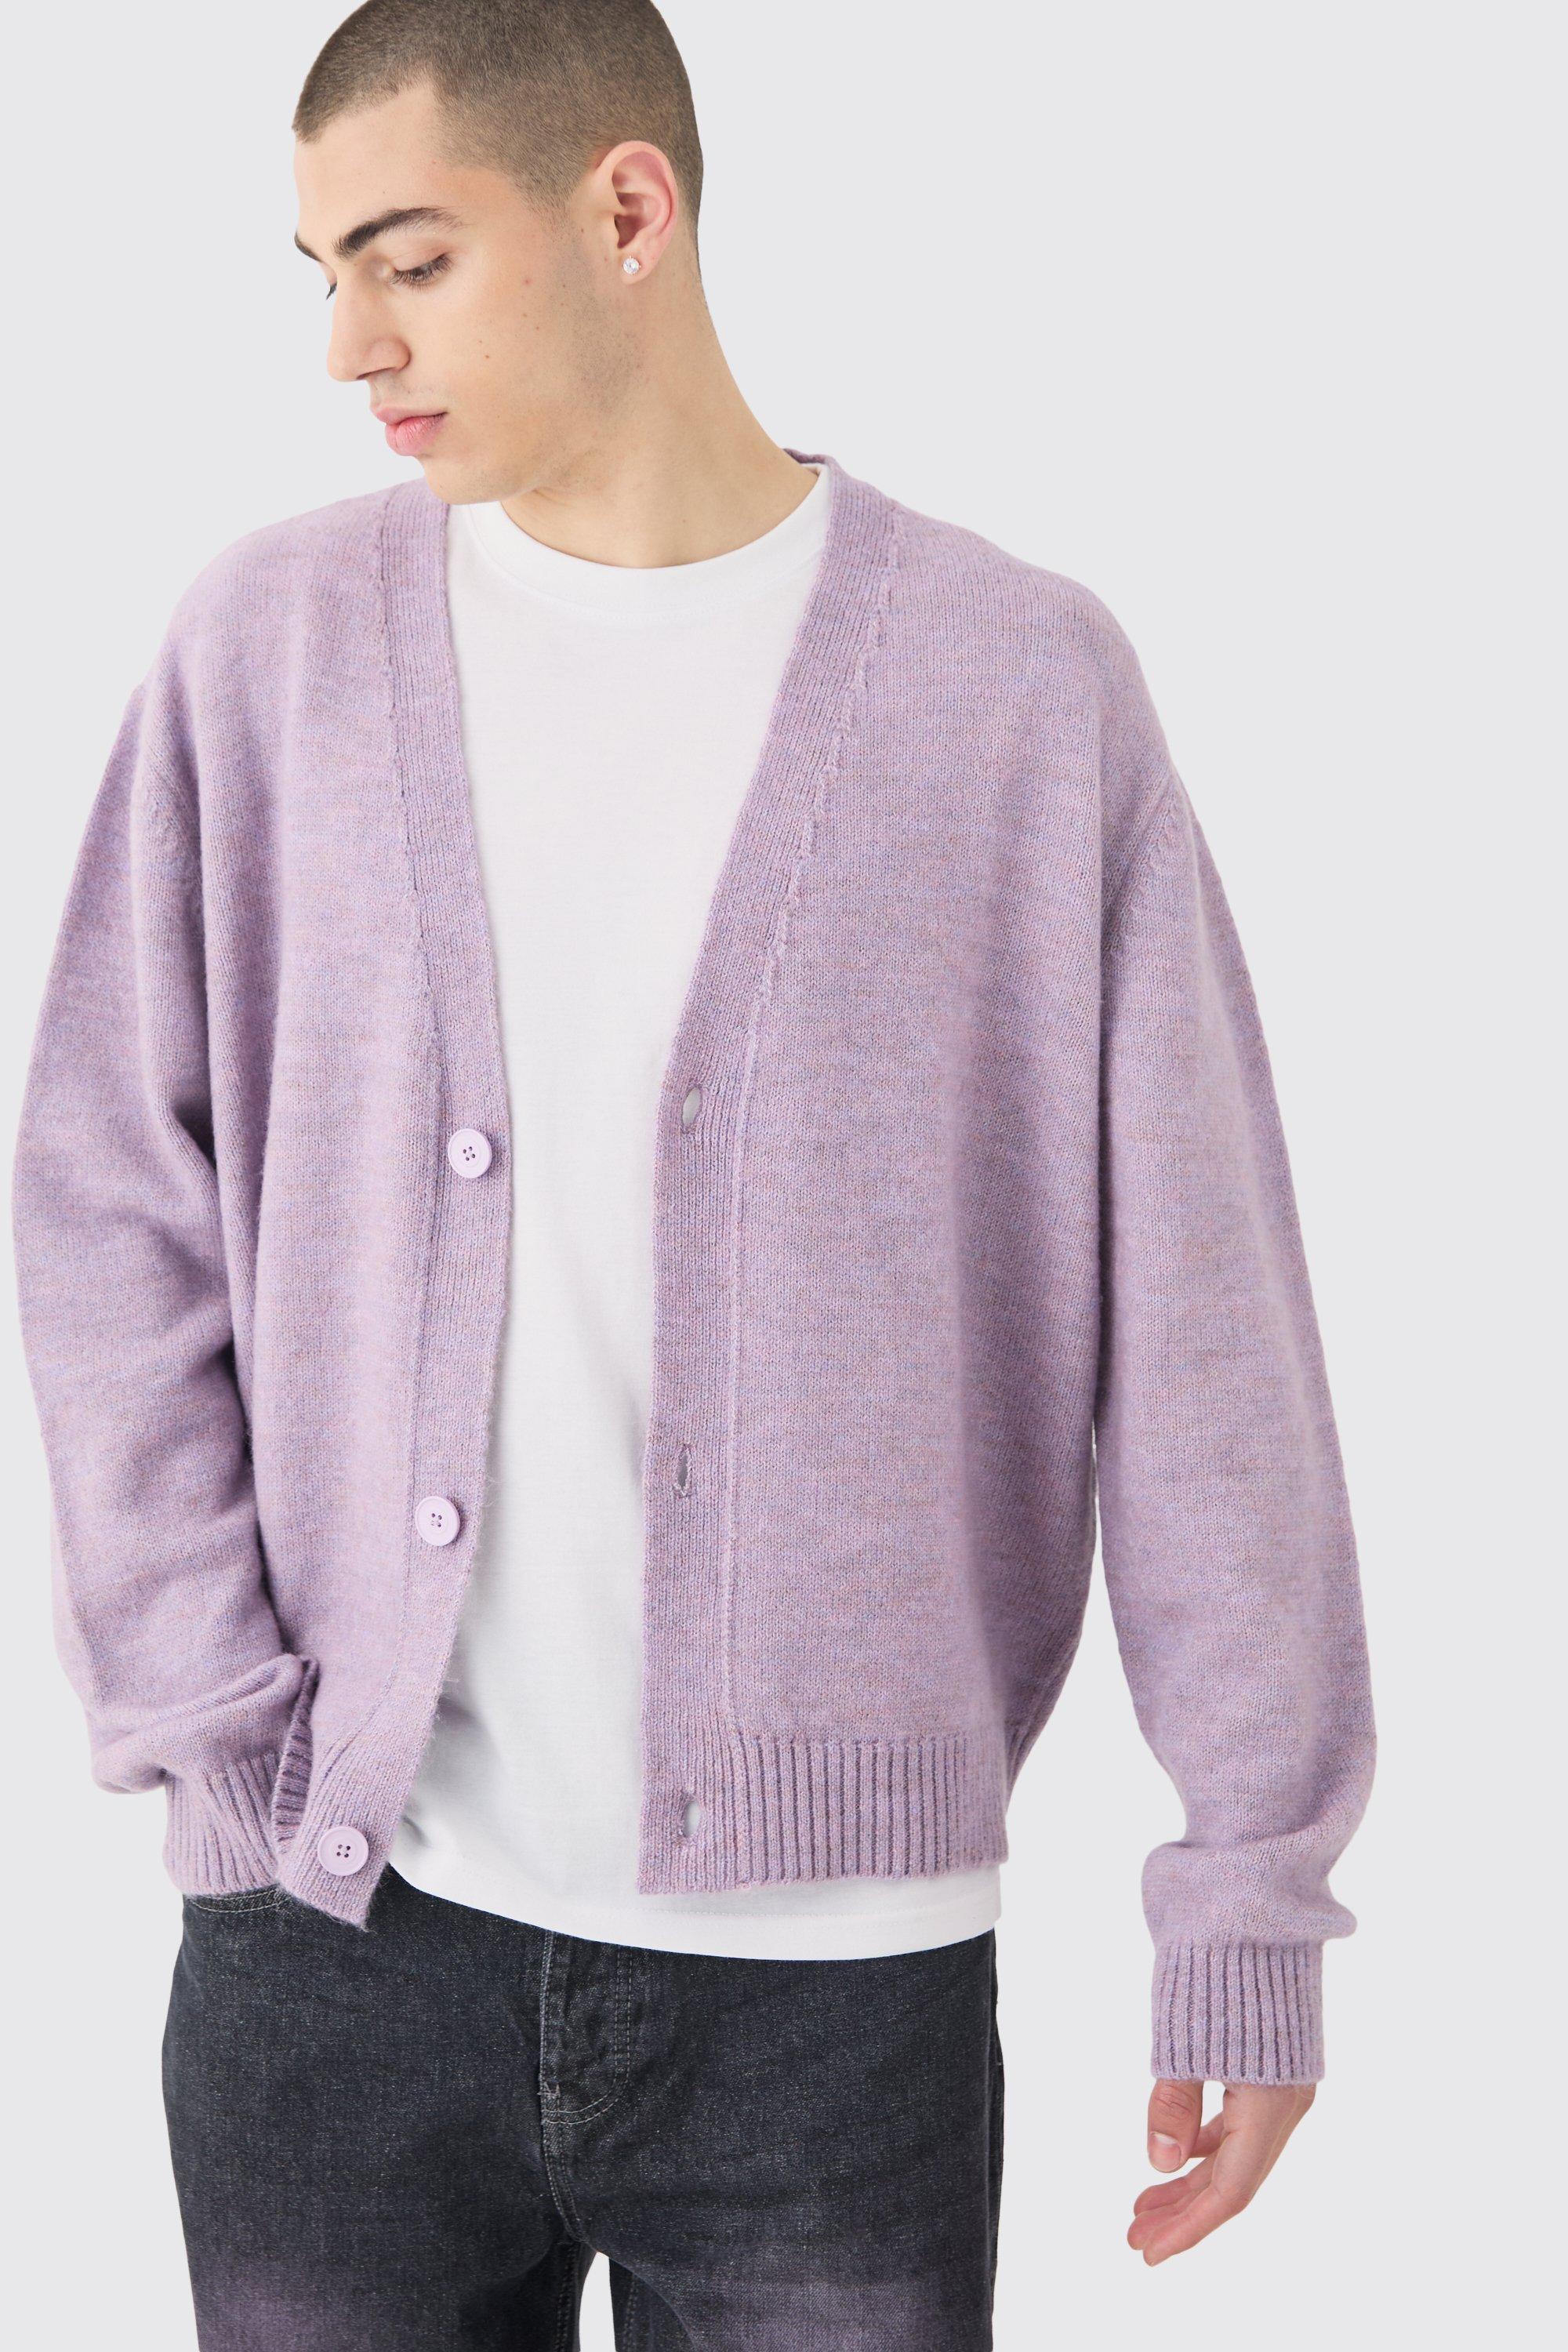 Image of Boxy Brushed Knit Cardigan In Lilac, Purple